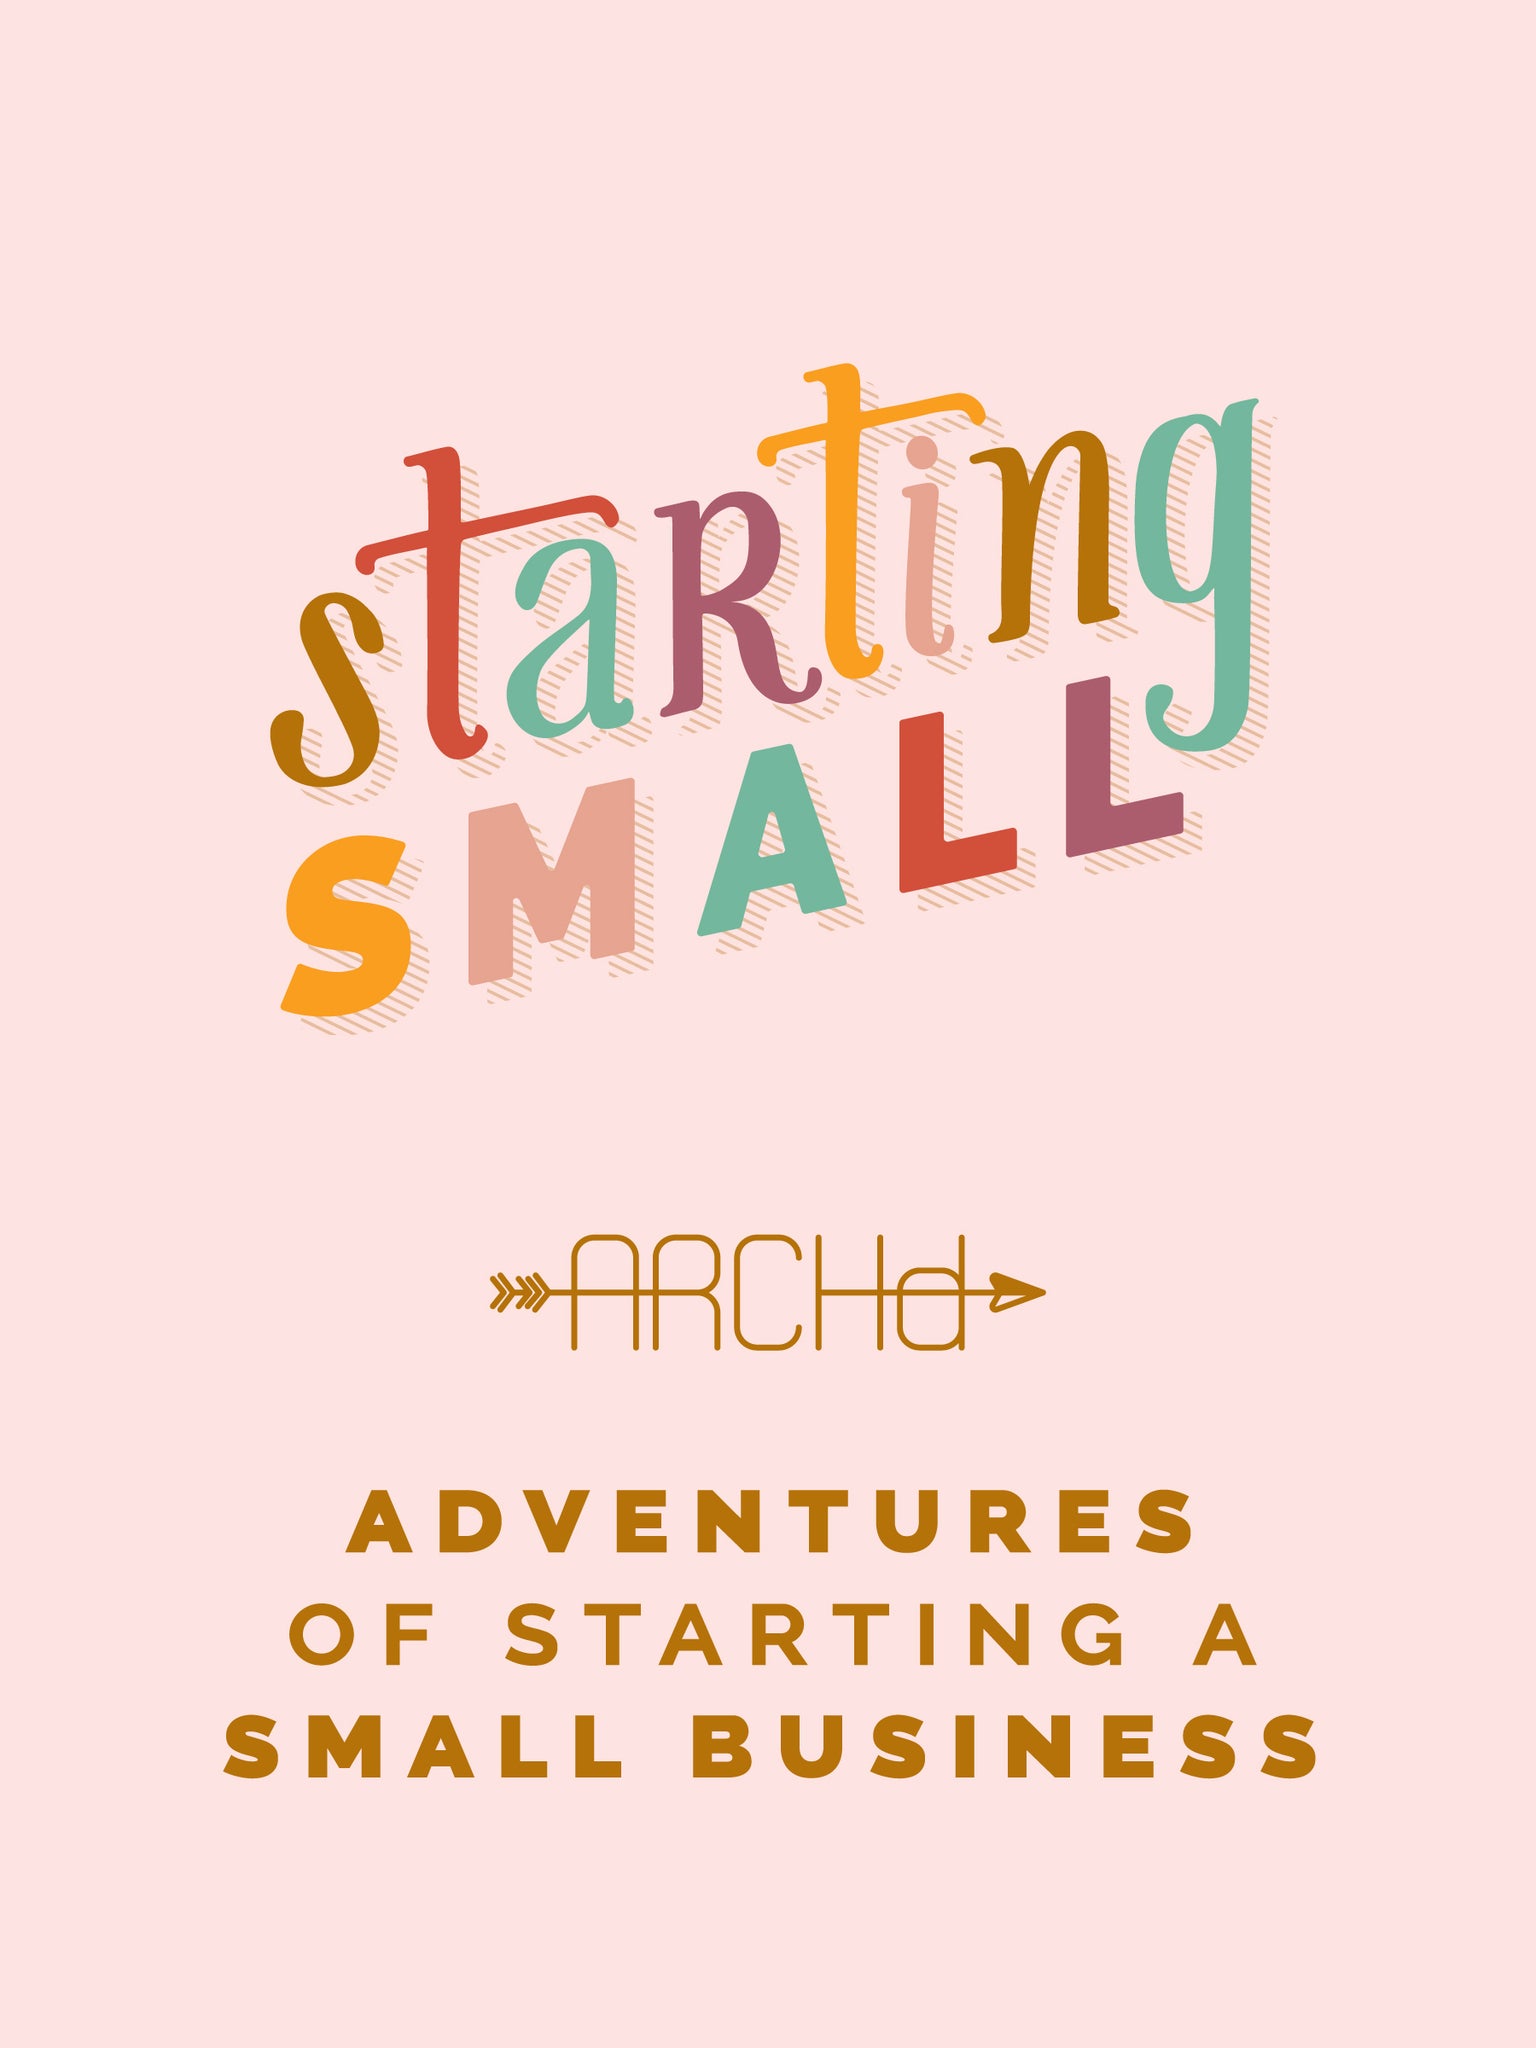 Starting Small Adventures of Starting a Small Business